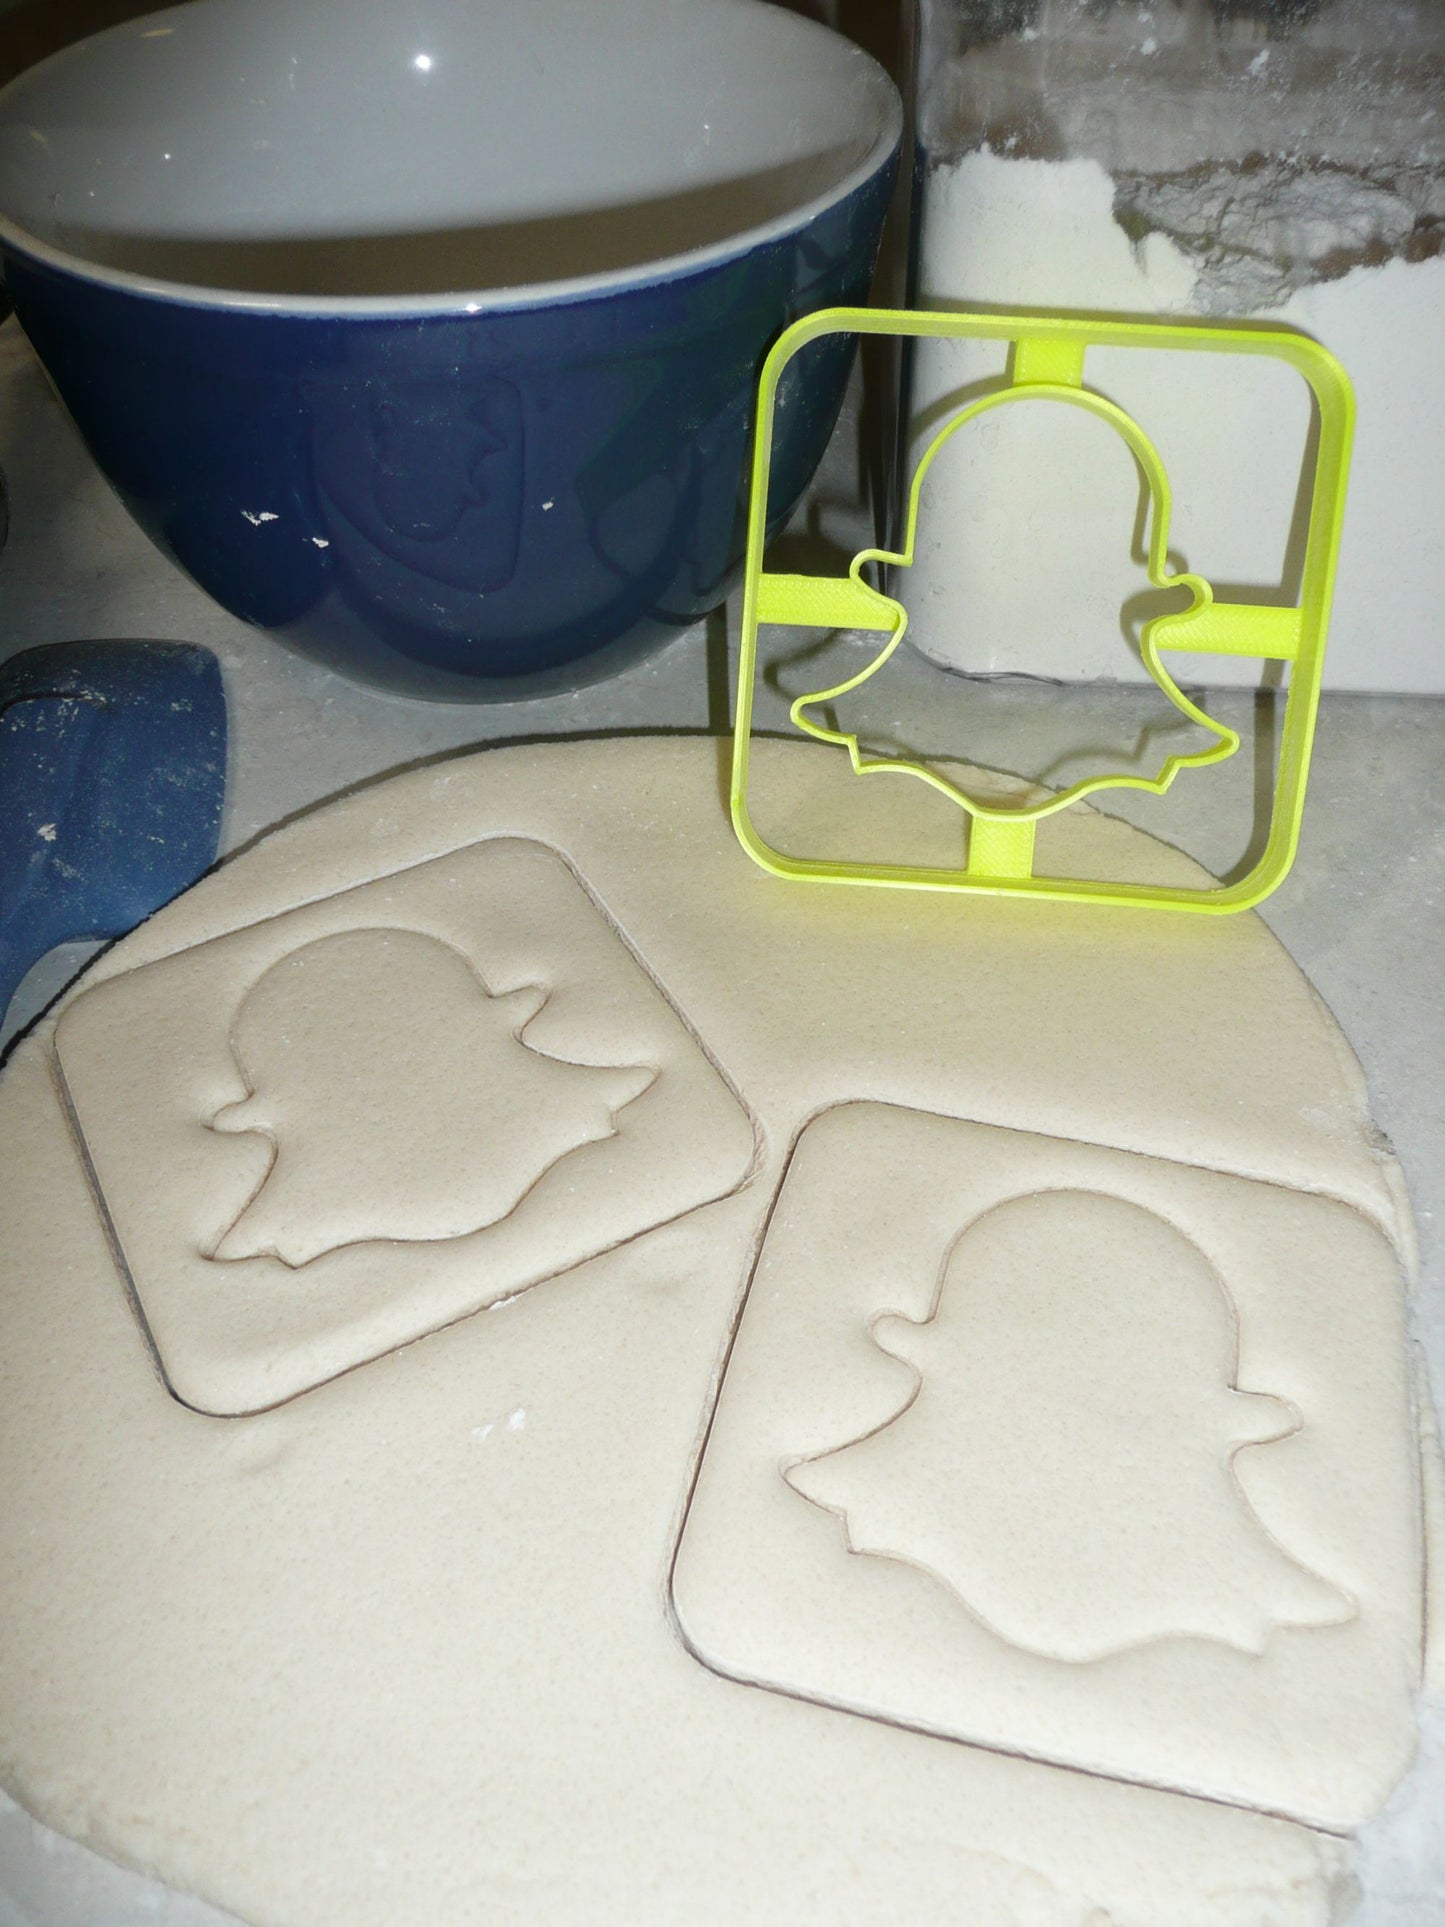 Snapchat Themed Photo Video Messaging App Cookie Cutter Made in USA PR2952